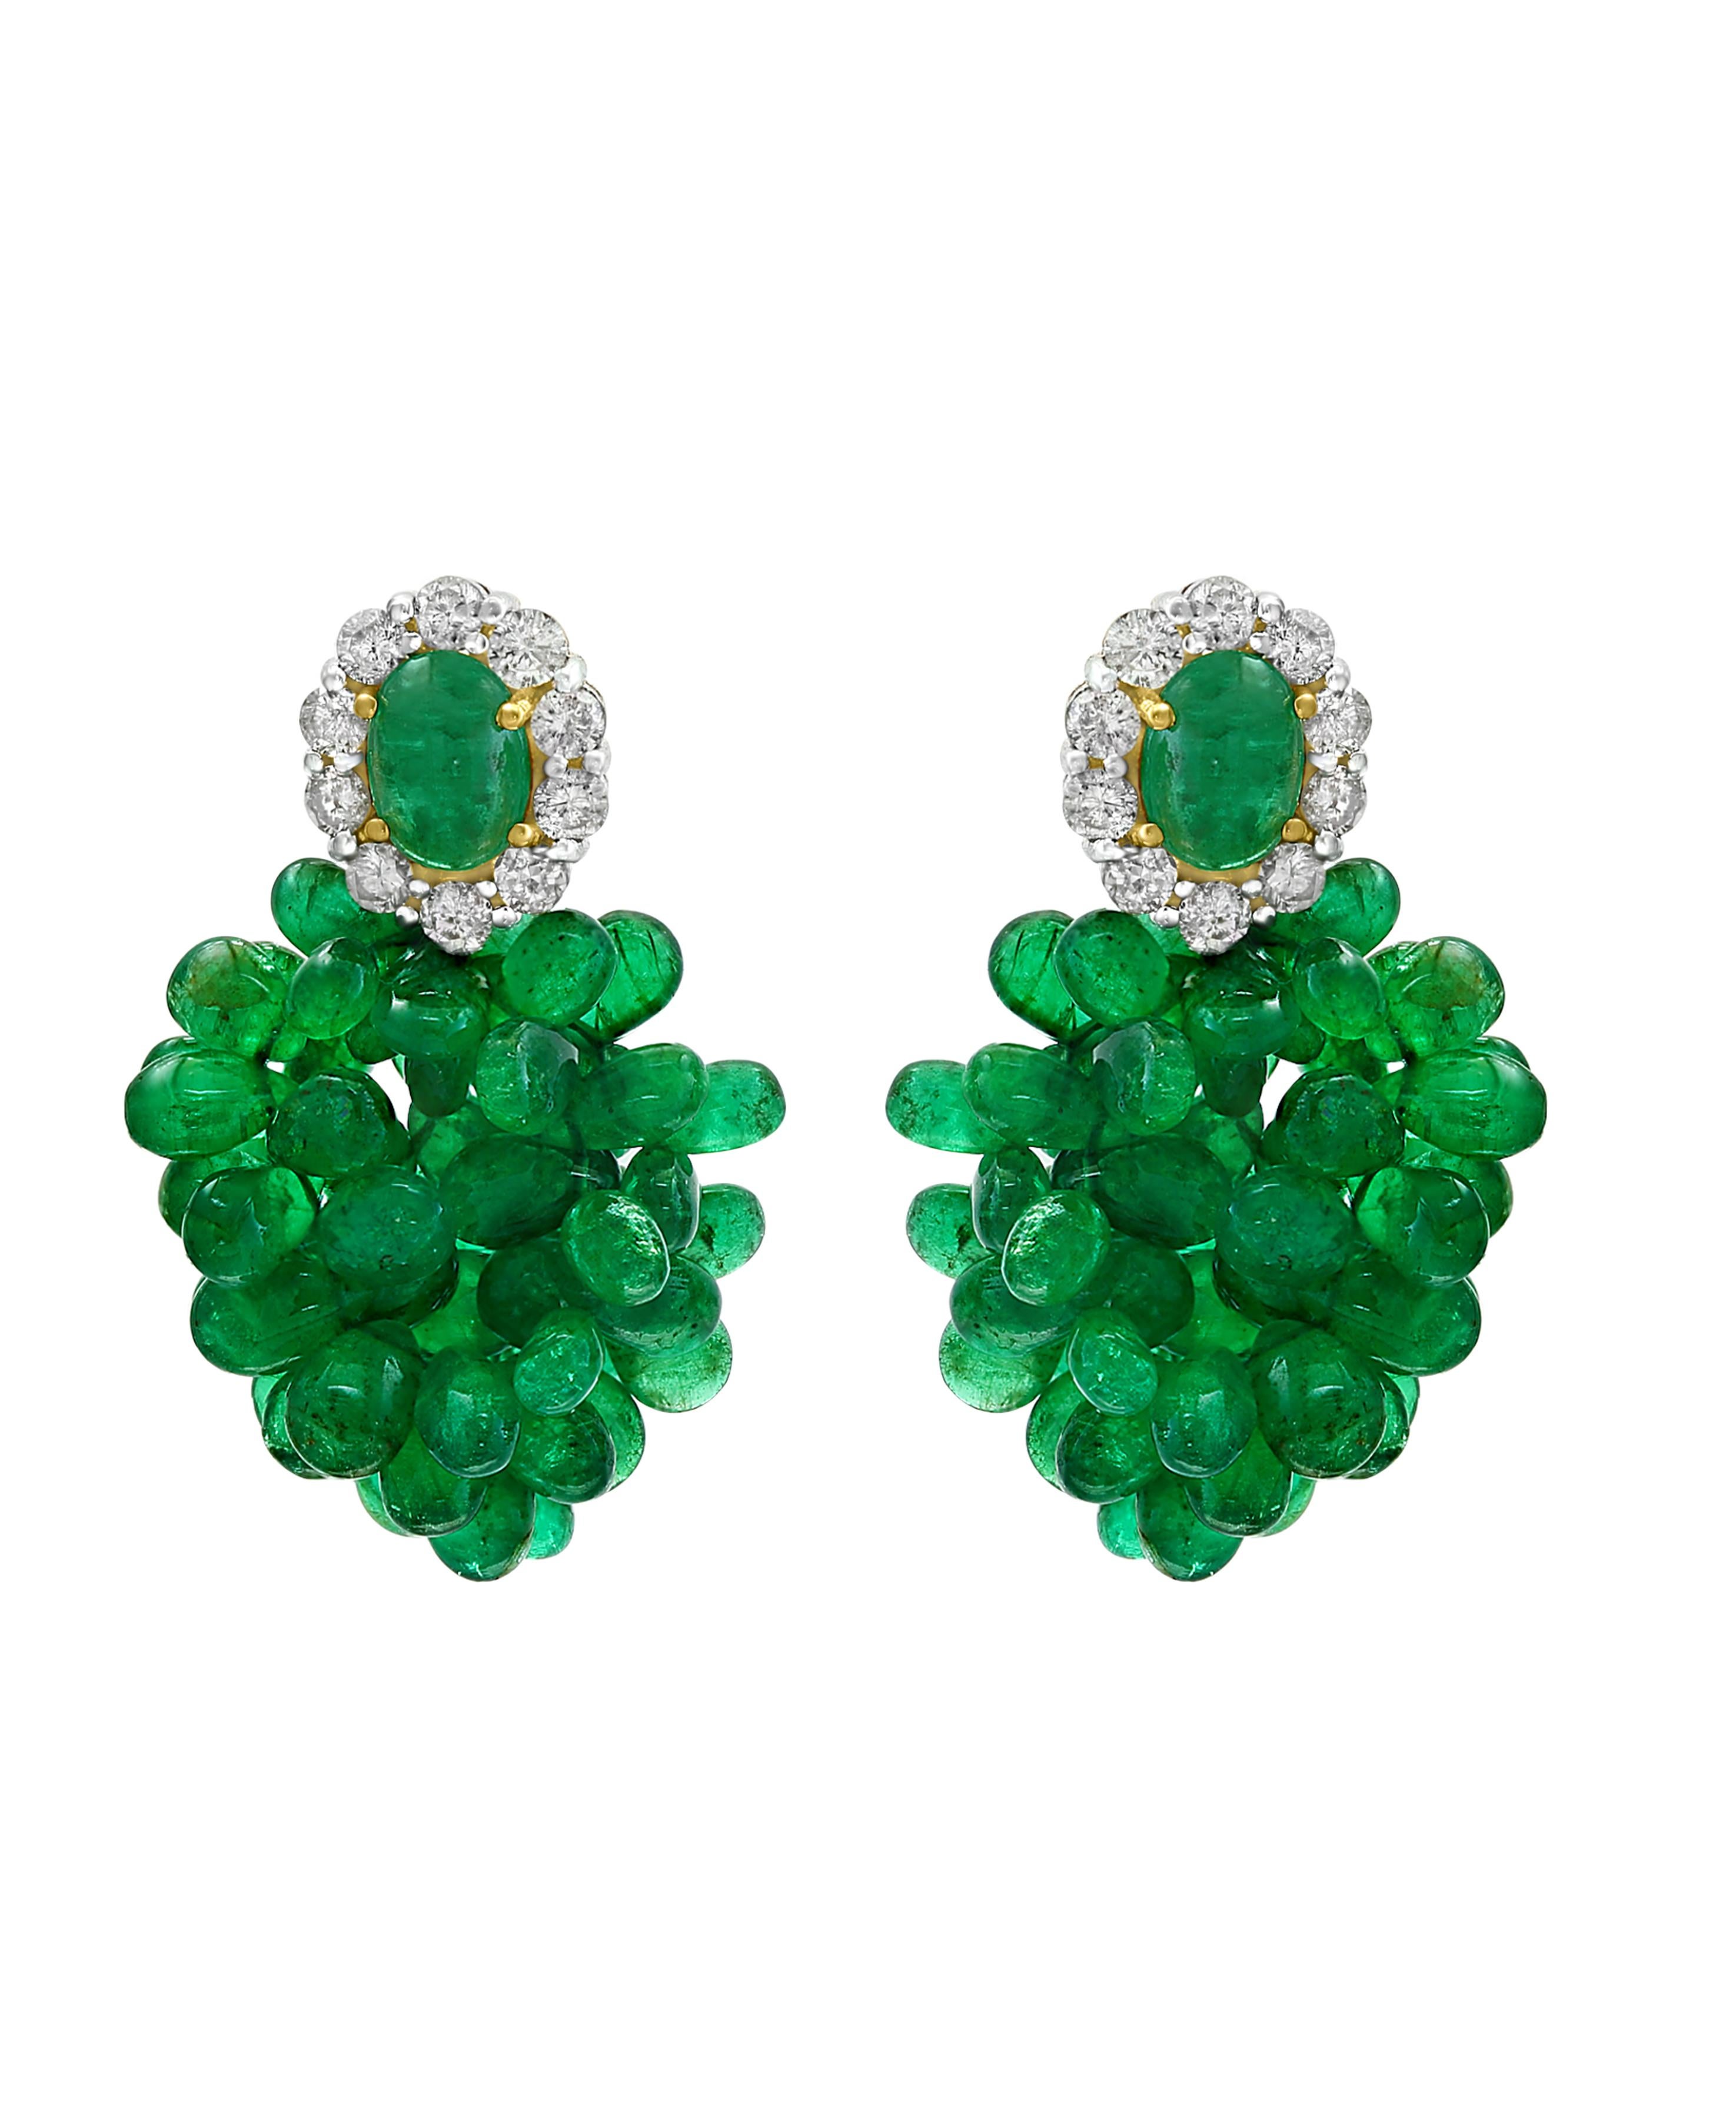 40 Carats  Colombian Emerald Briolettes & Diamond  Hanging Earrings  18 Karat  Gold 
This exquisite pair of earrings are beautifully crafted with 18 karat yellow gold  weighing 13.5 grams
Two fine  Cabochon Emerald   weighing approximately 2  carats